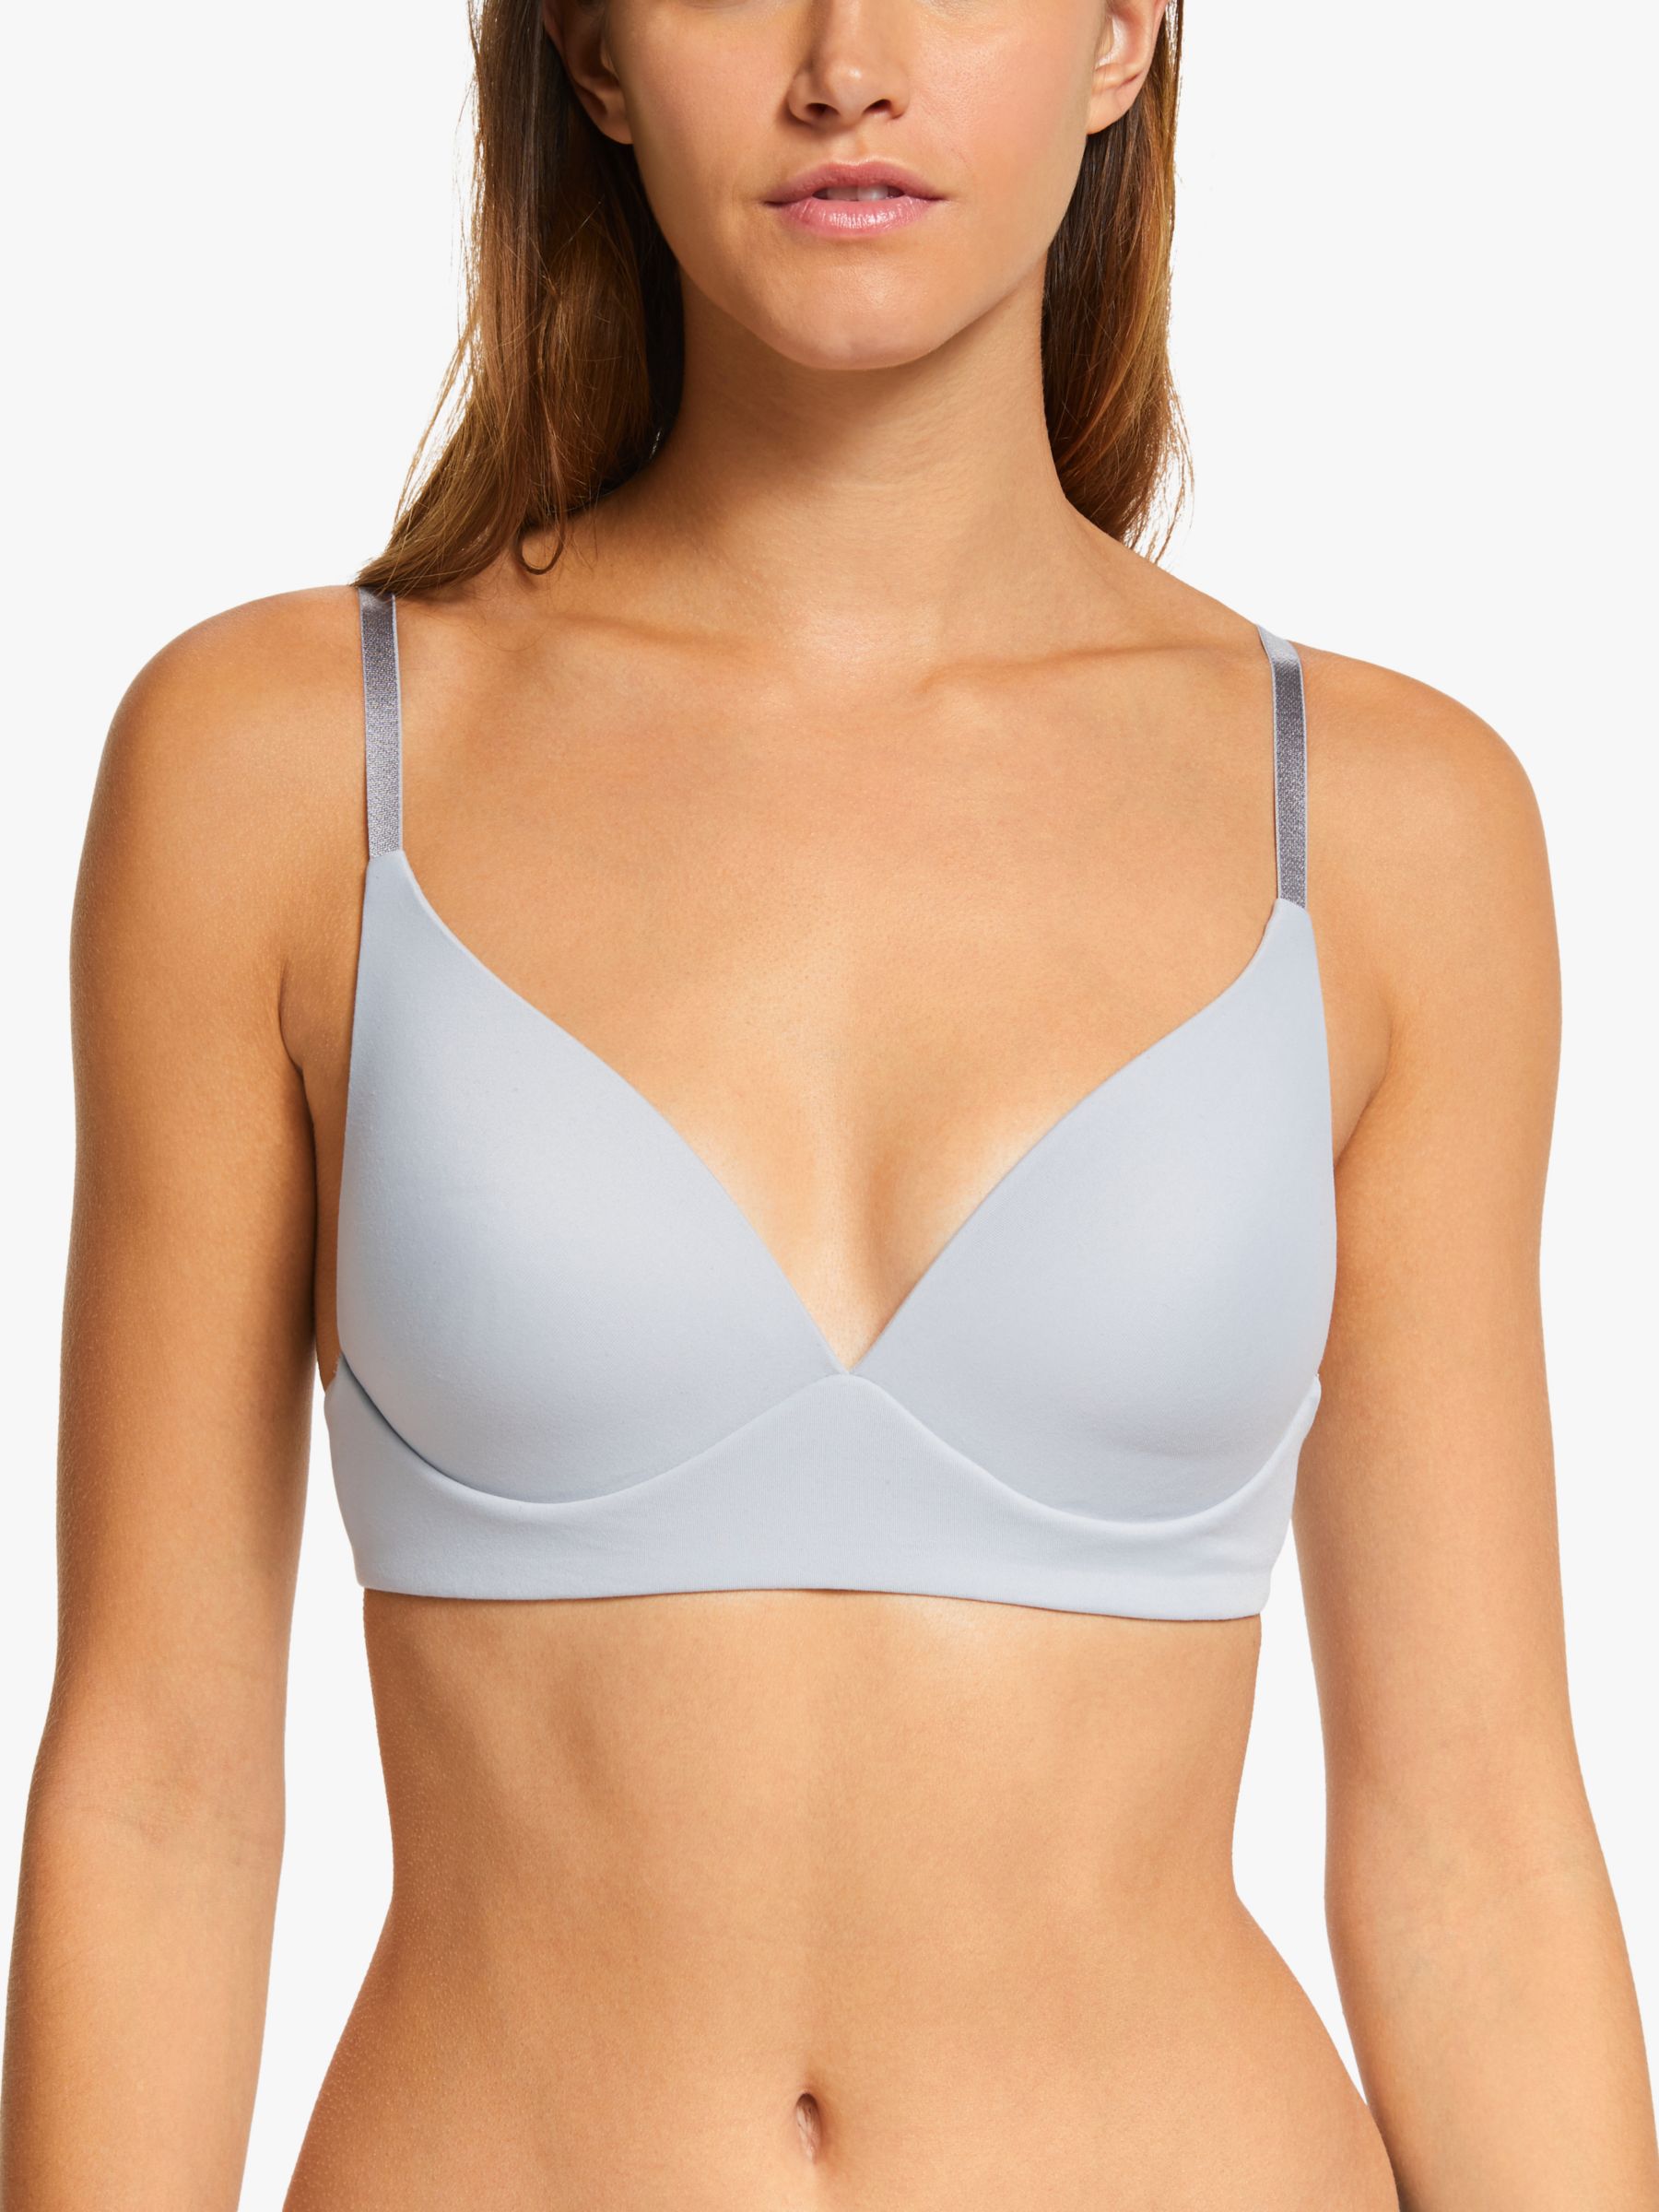 John Lewis ANYDAY Willow Non-Wired Bra, Grey at John Lewis & Partners